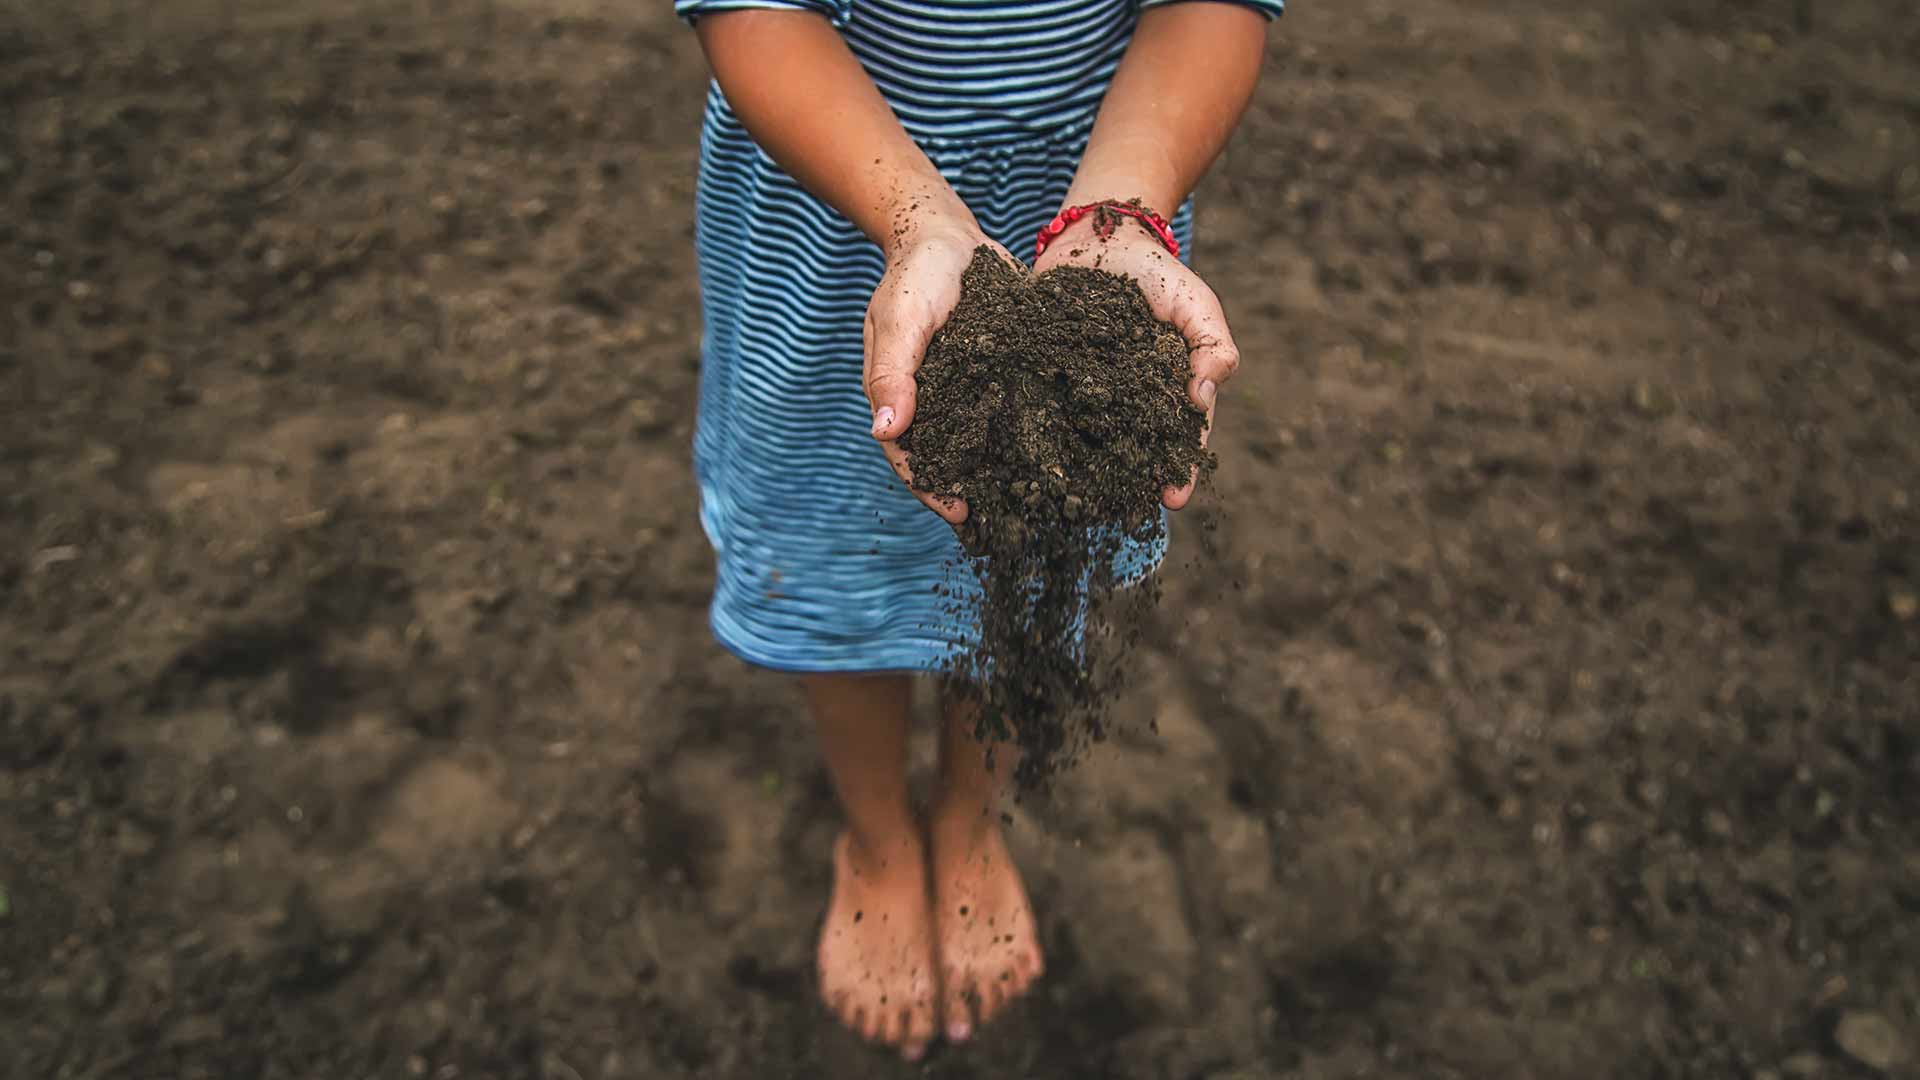 Playing in dirt builds healthy immune system